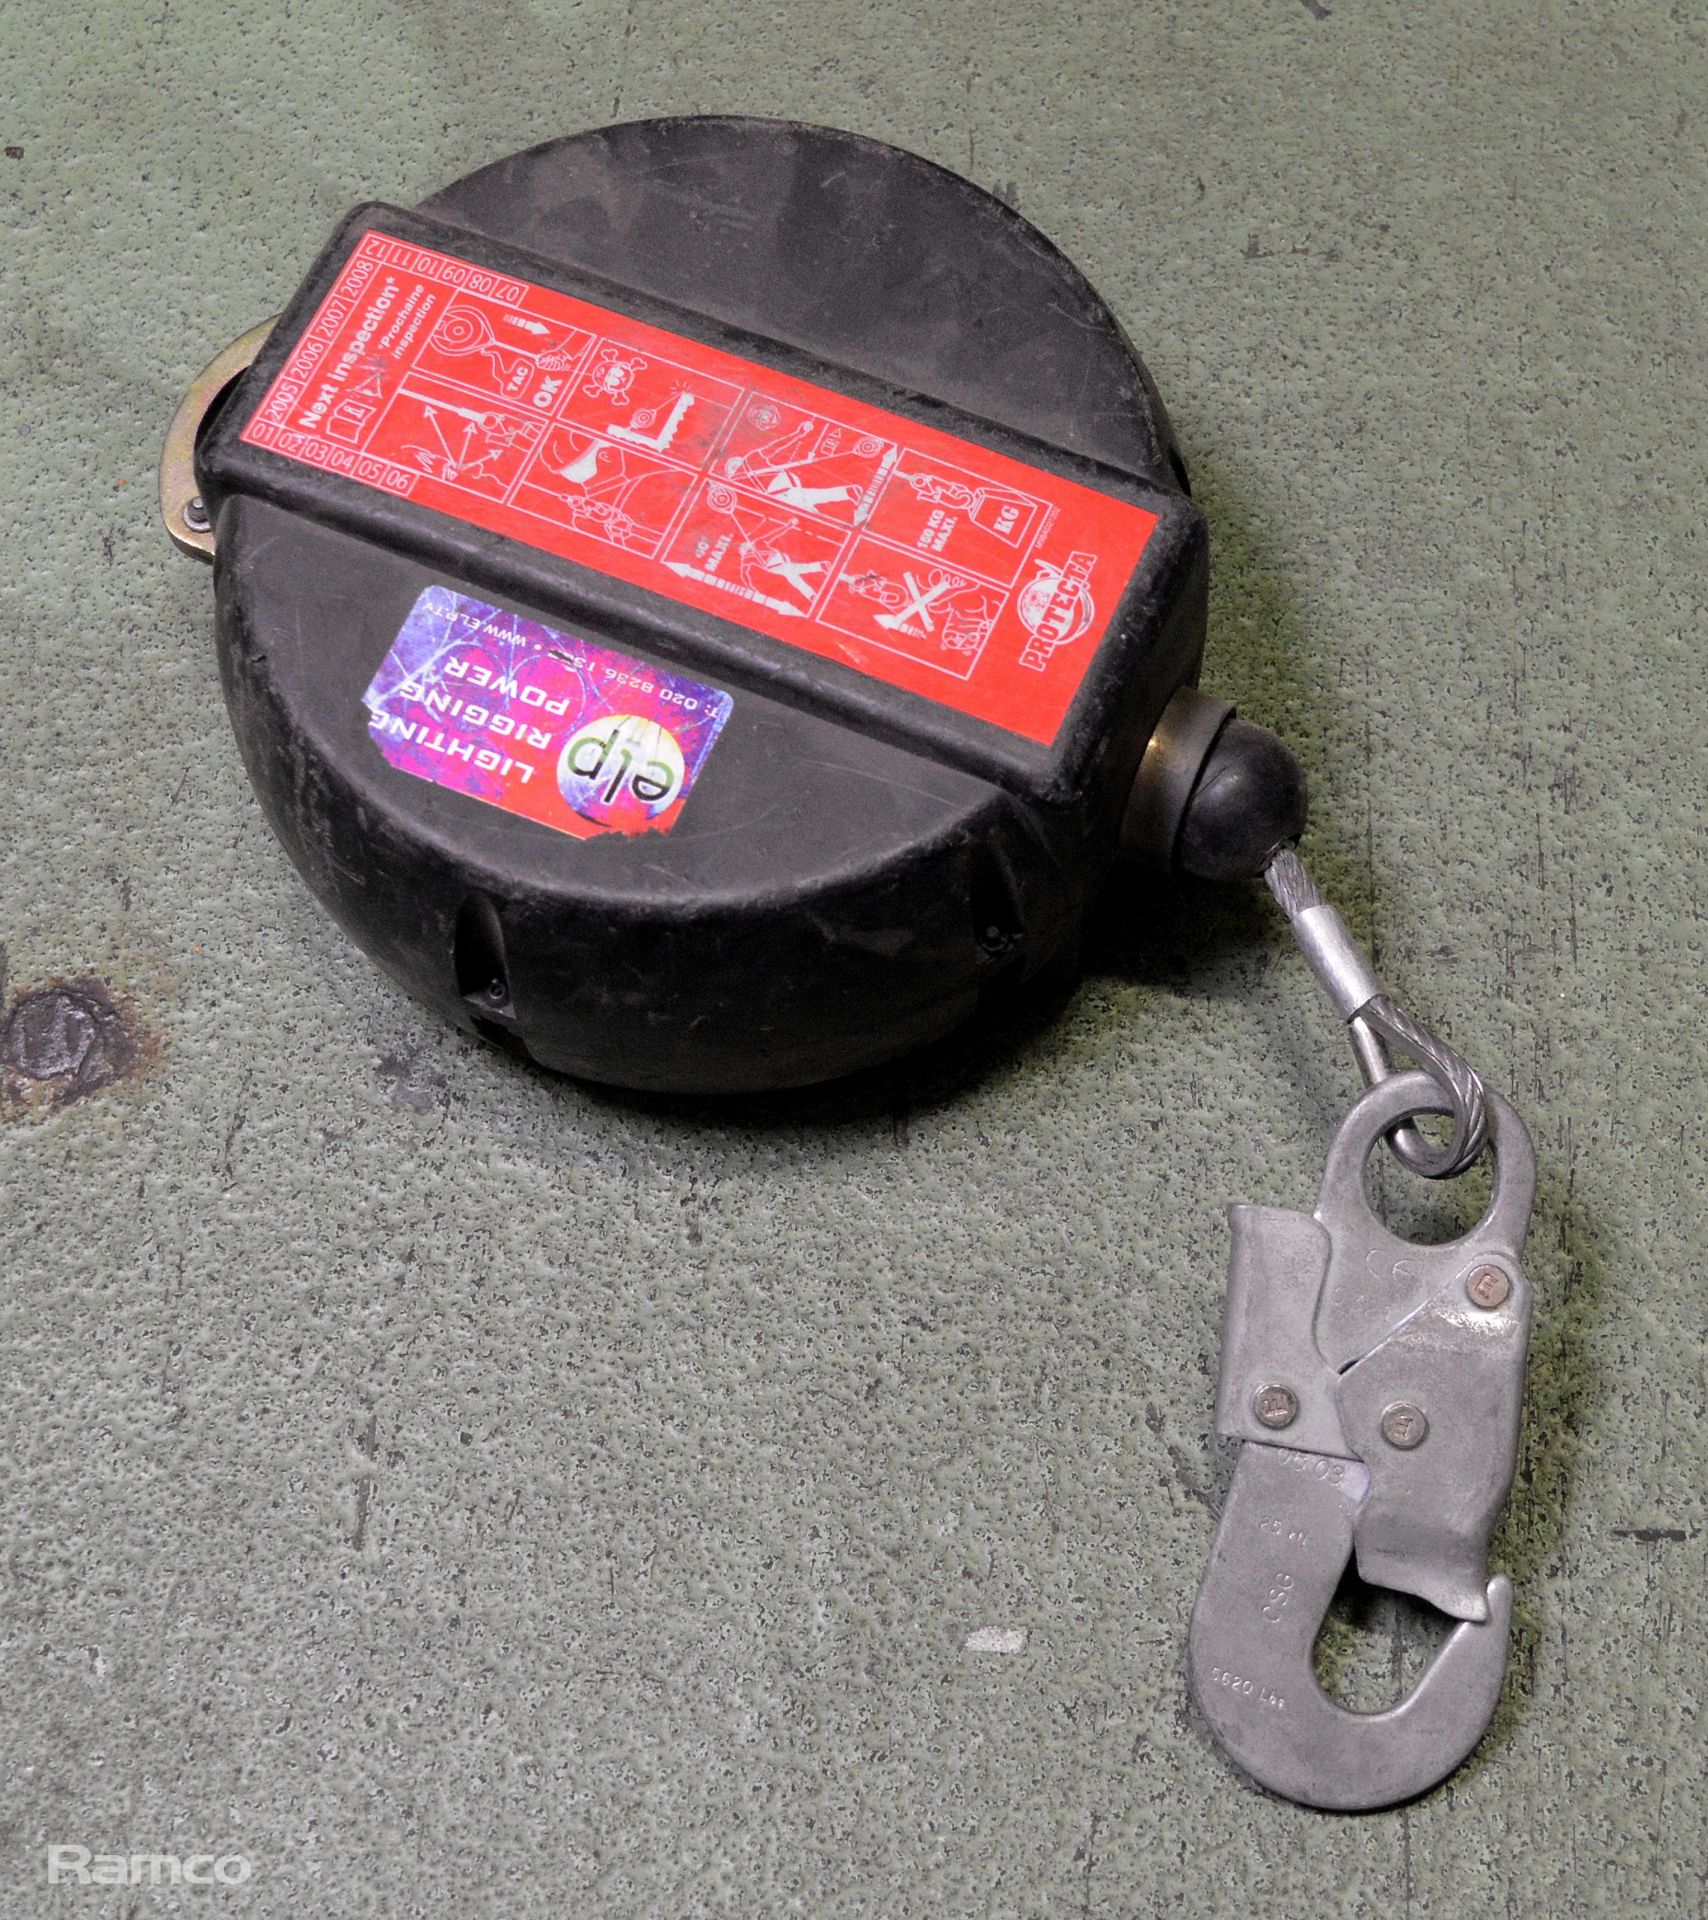 Protecta JRG Fall Arrest Safety Device - Image 3 of 3